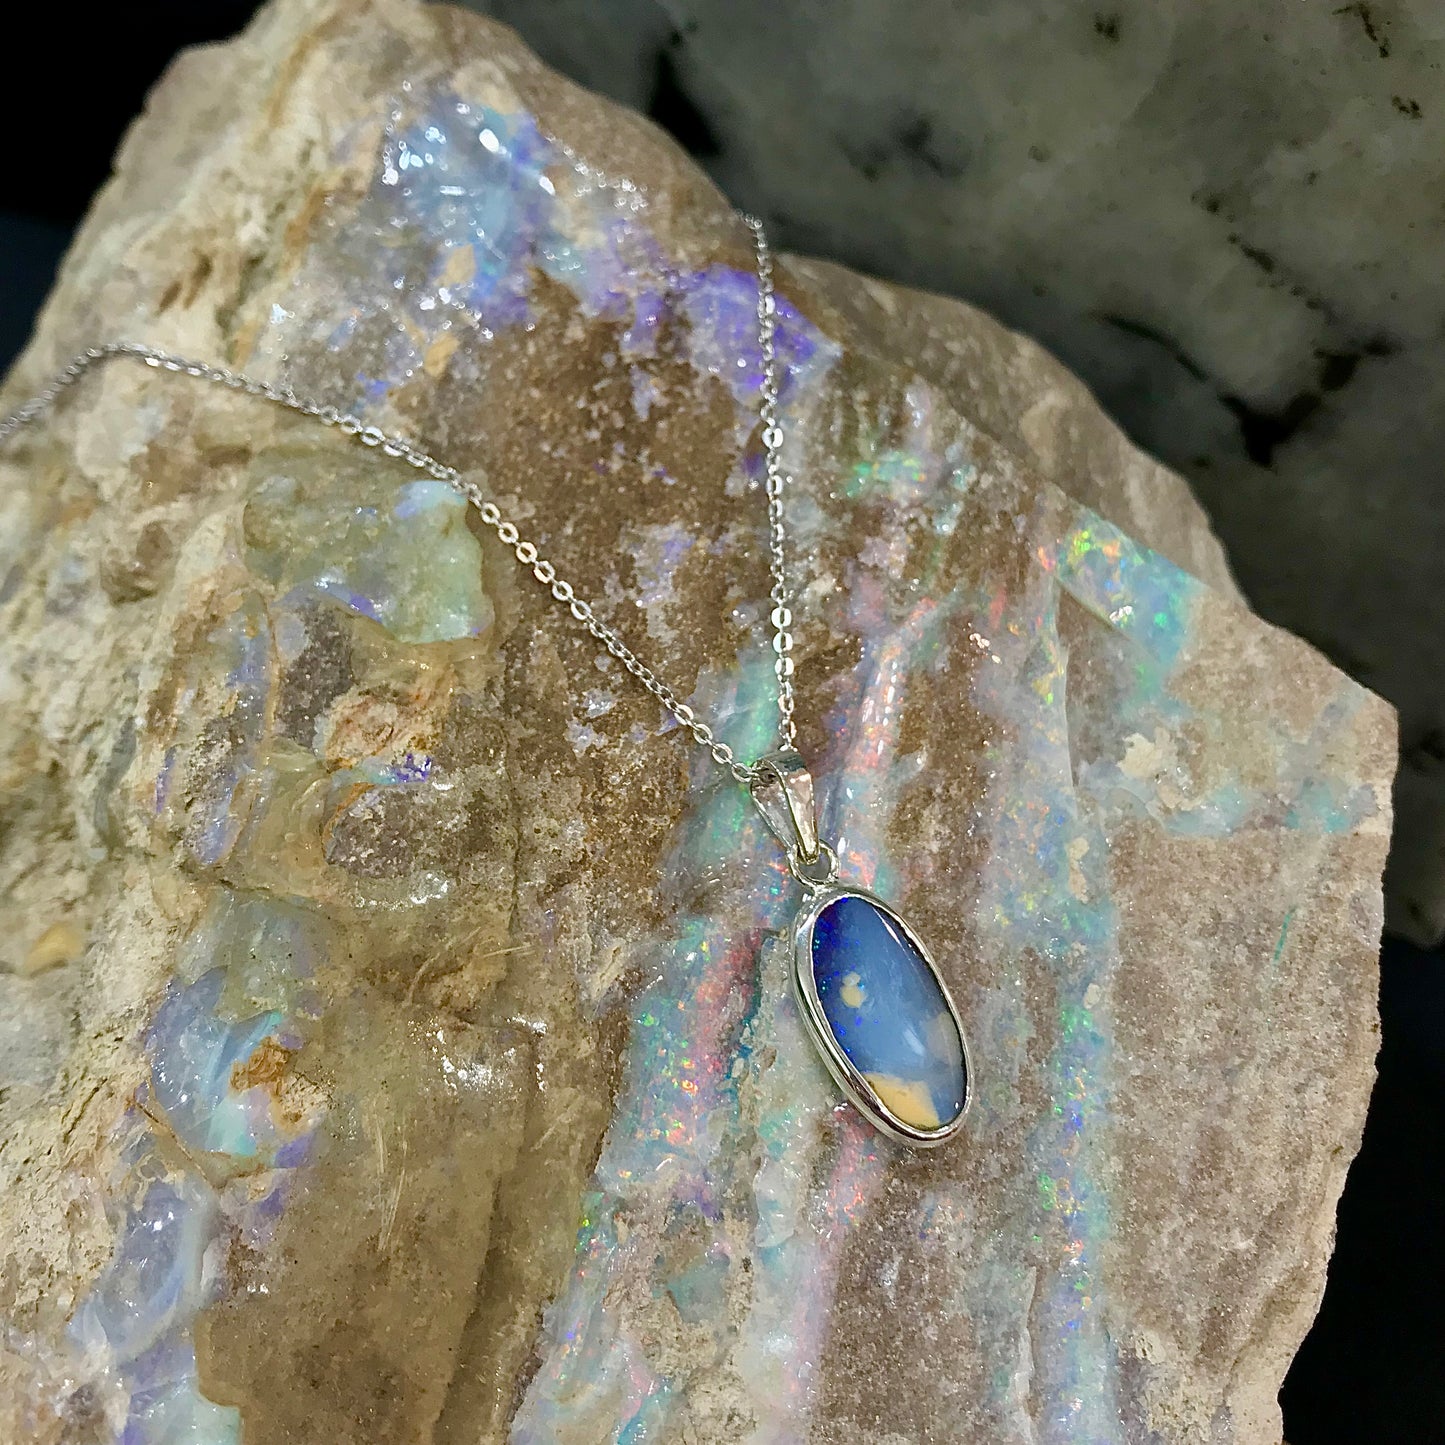 A photo of a Queensland Australian blue boulder opal with tan matrix set into a sterling silver bezel pendant.  The opal resembles a beach with tan sand matrix and a blue ocean of color.  The pendant is on a sterling silver cable chain and against a natural rough white crystal opal specimen backdrop.